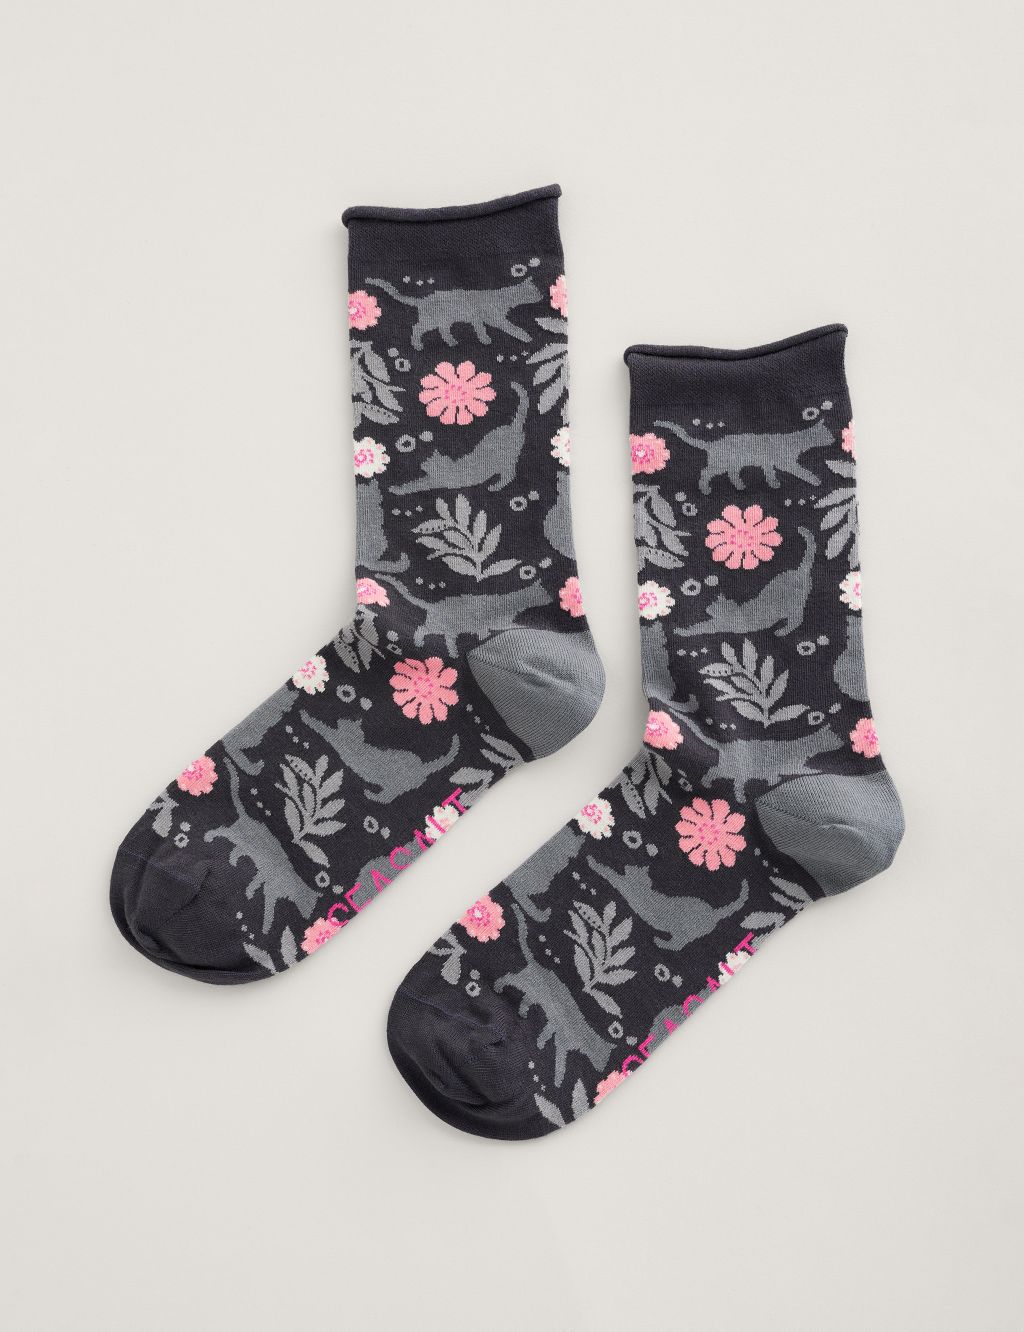 Cat and Floral Ankle High Socks